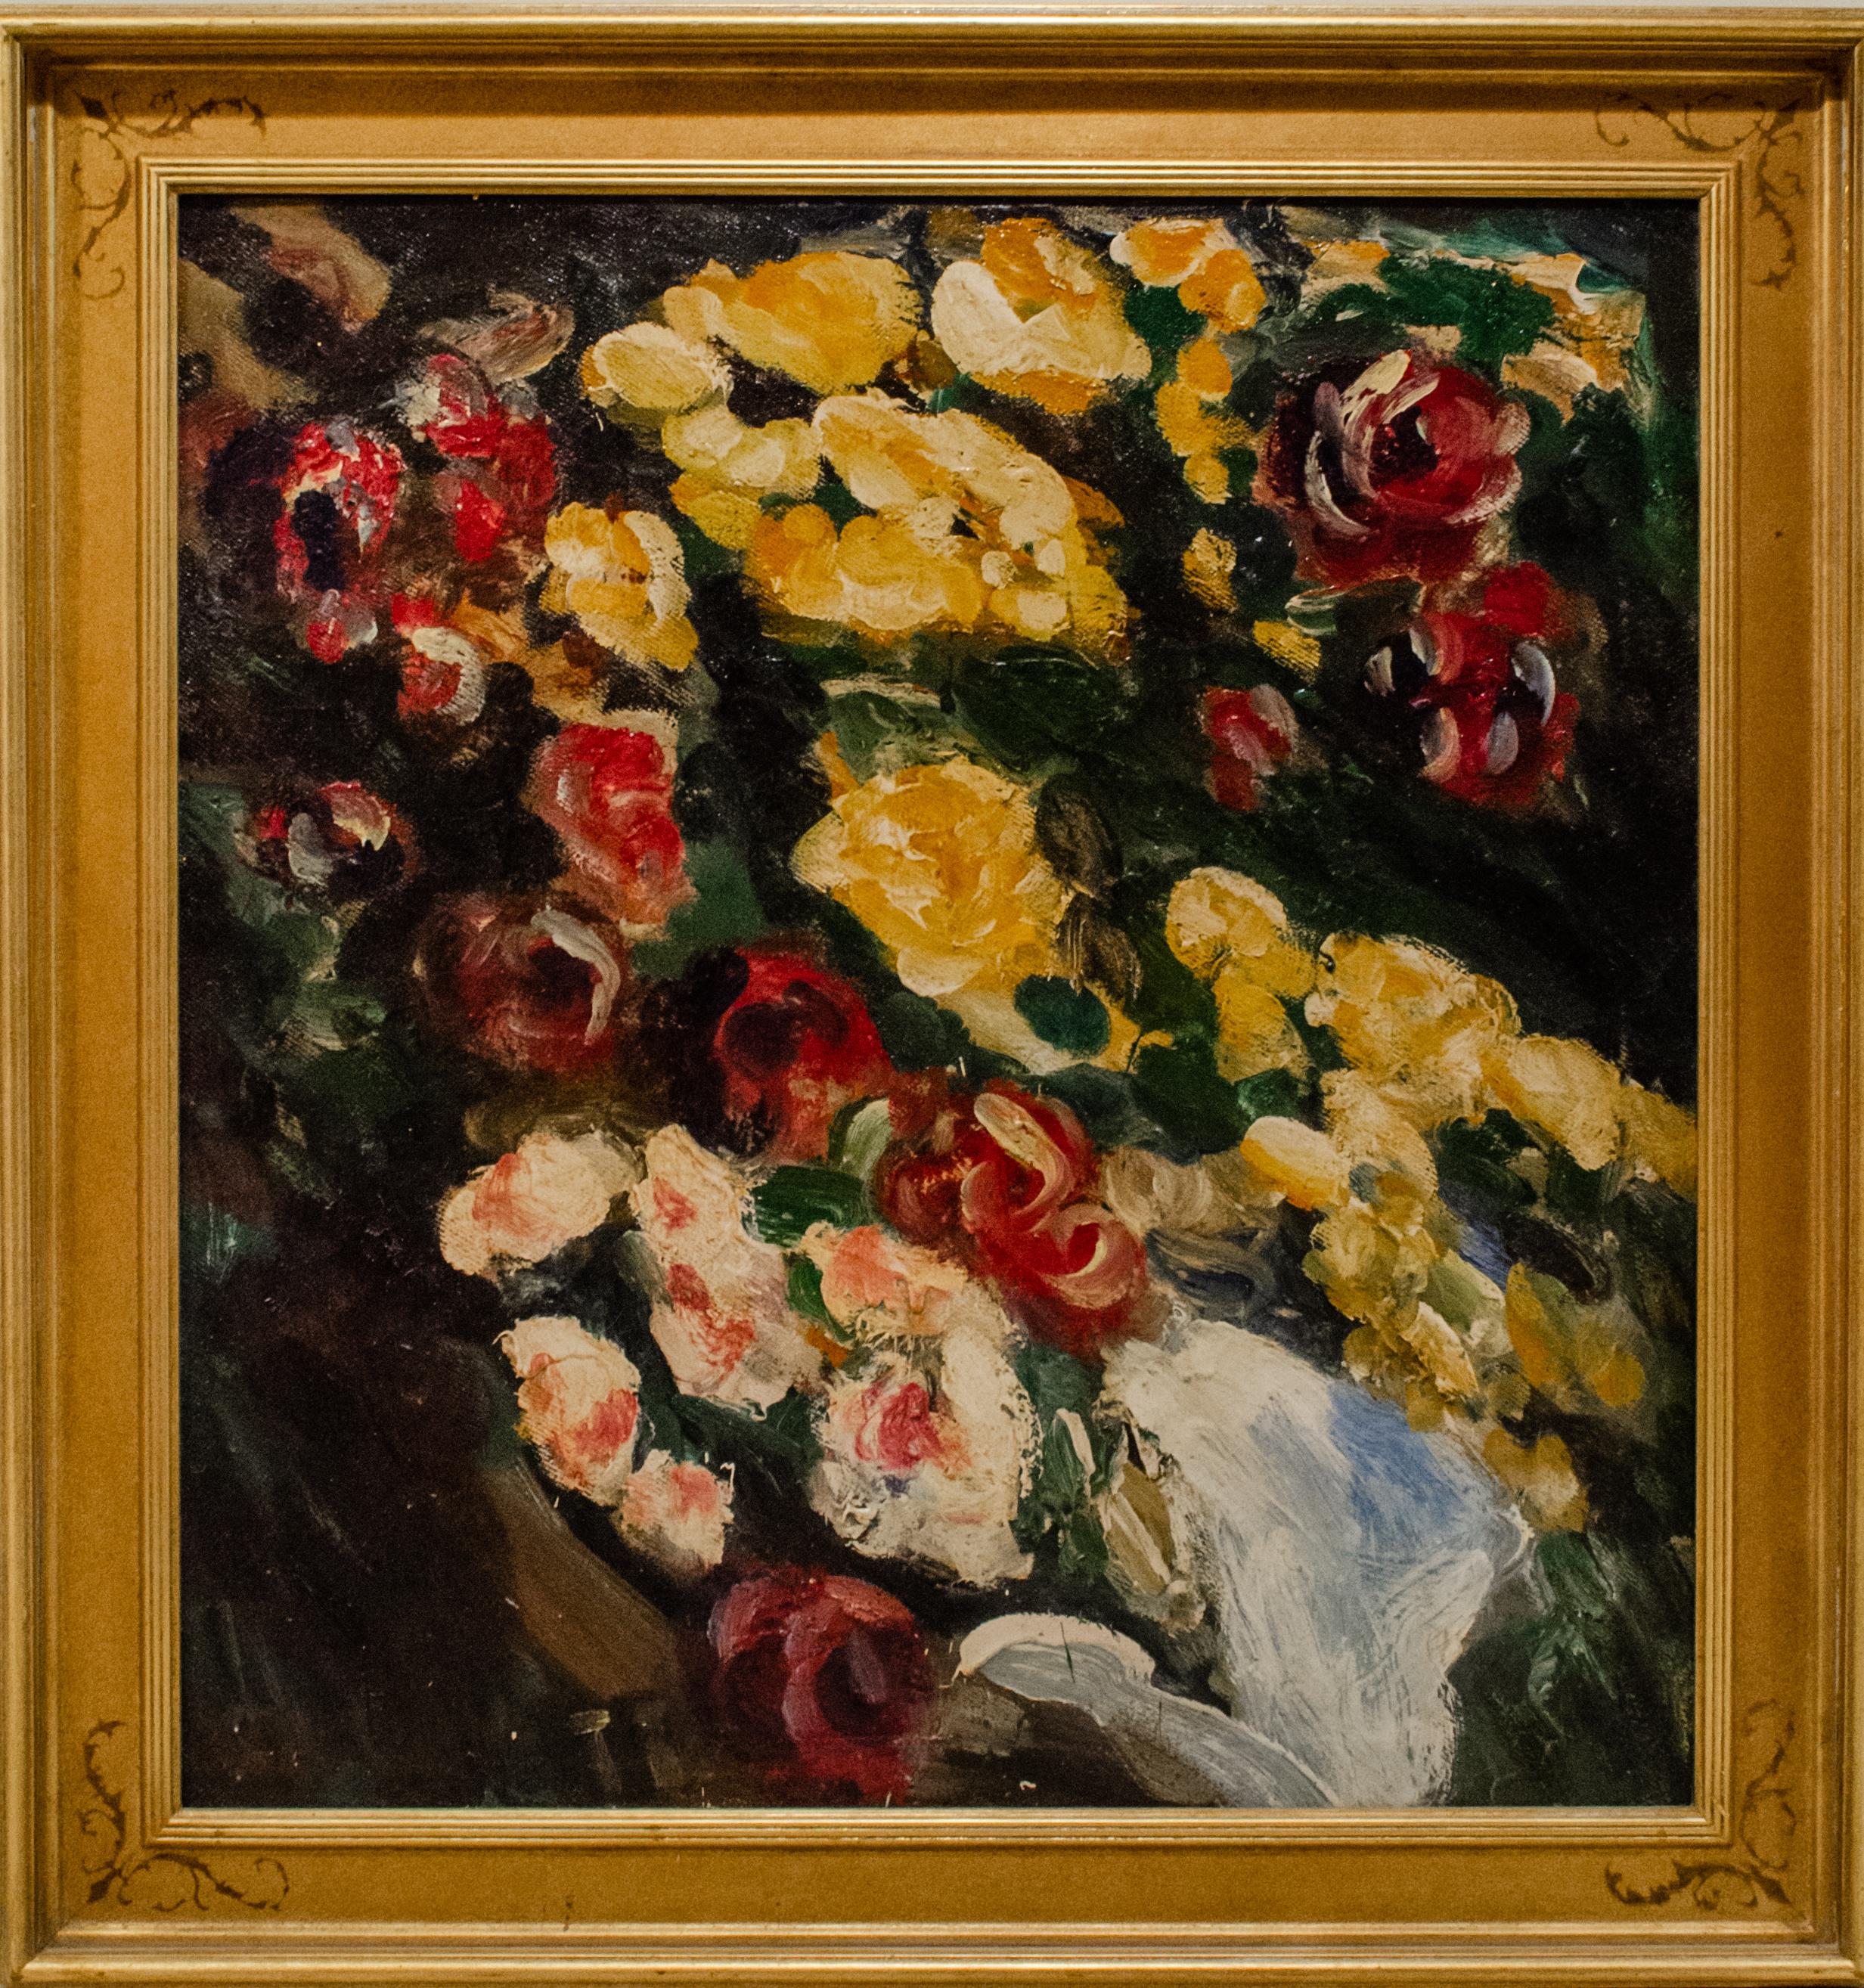 Merton Clivette (1868-1931)
No. 183, Flowers!, c. late 19th-early 20th century
Oil on canvas
35 x 32 in.
Framed: 41 1/2 x 39 in.
Inscribed verso: No. 183, Flowers! by Clivette

Clivette was born in Portage, Wisconsin, in 1868 as Merton Clive Cook,